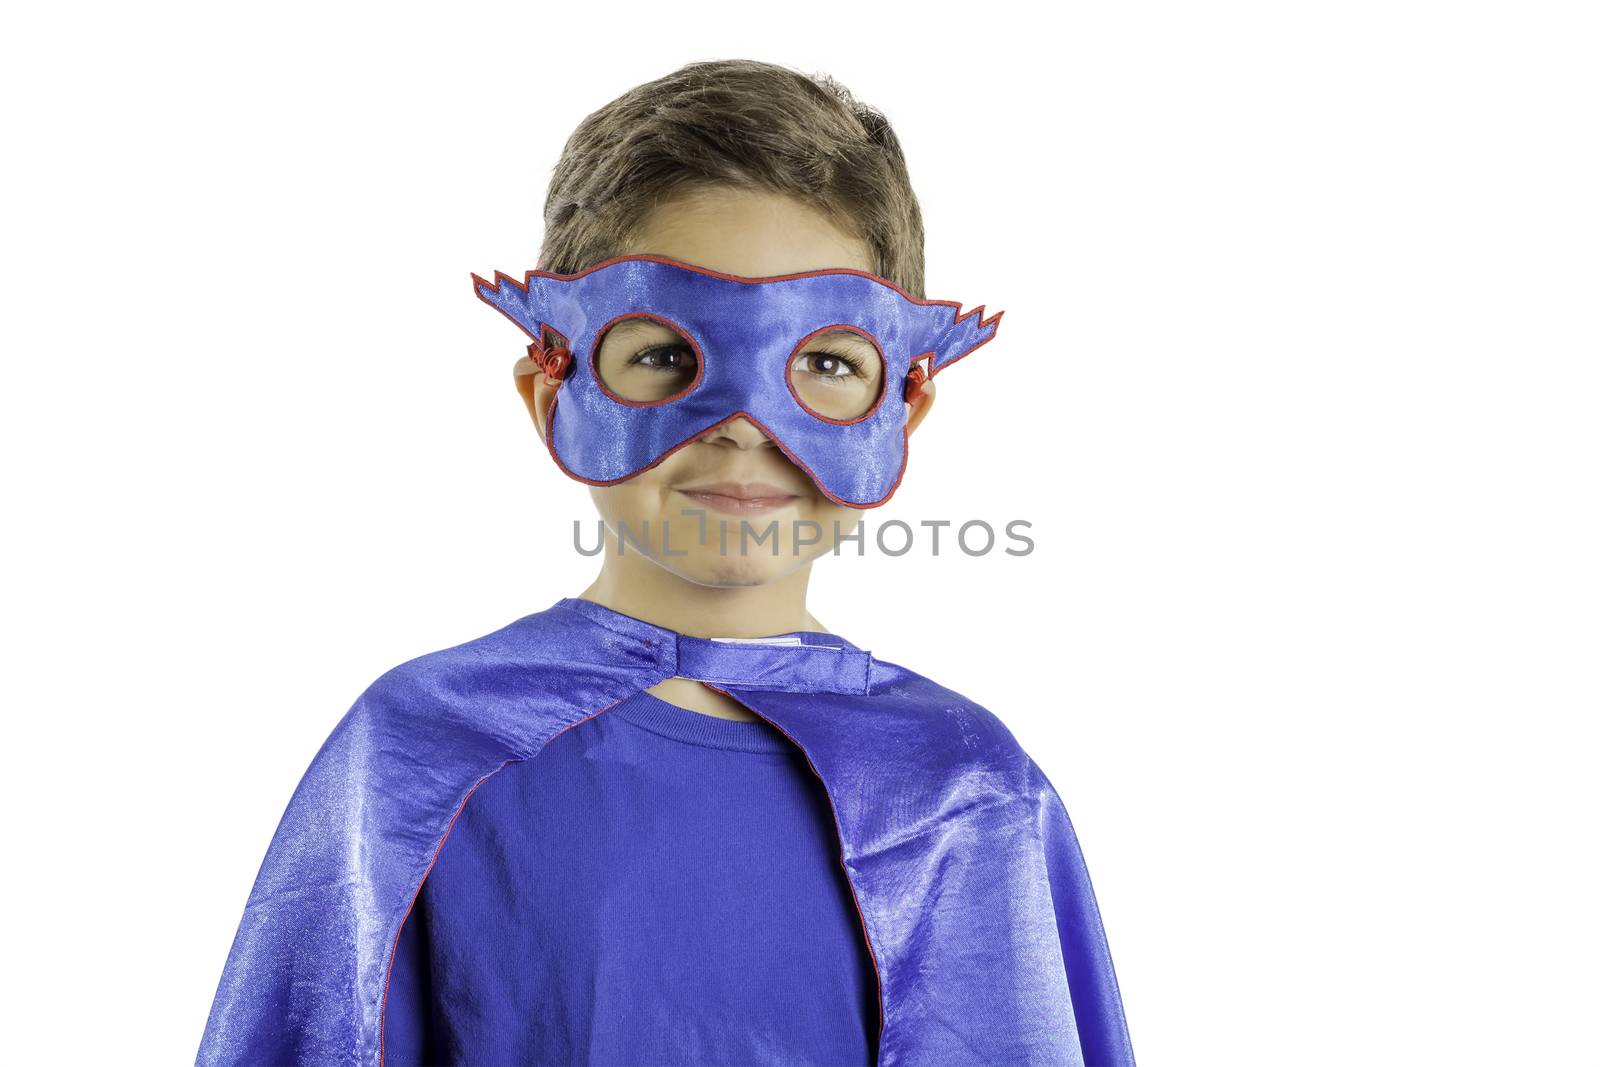 A young boy dressed in a superhero costume isolated on a white background.